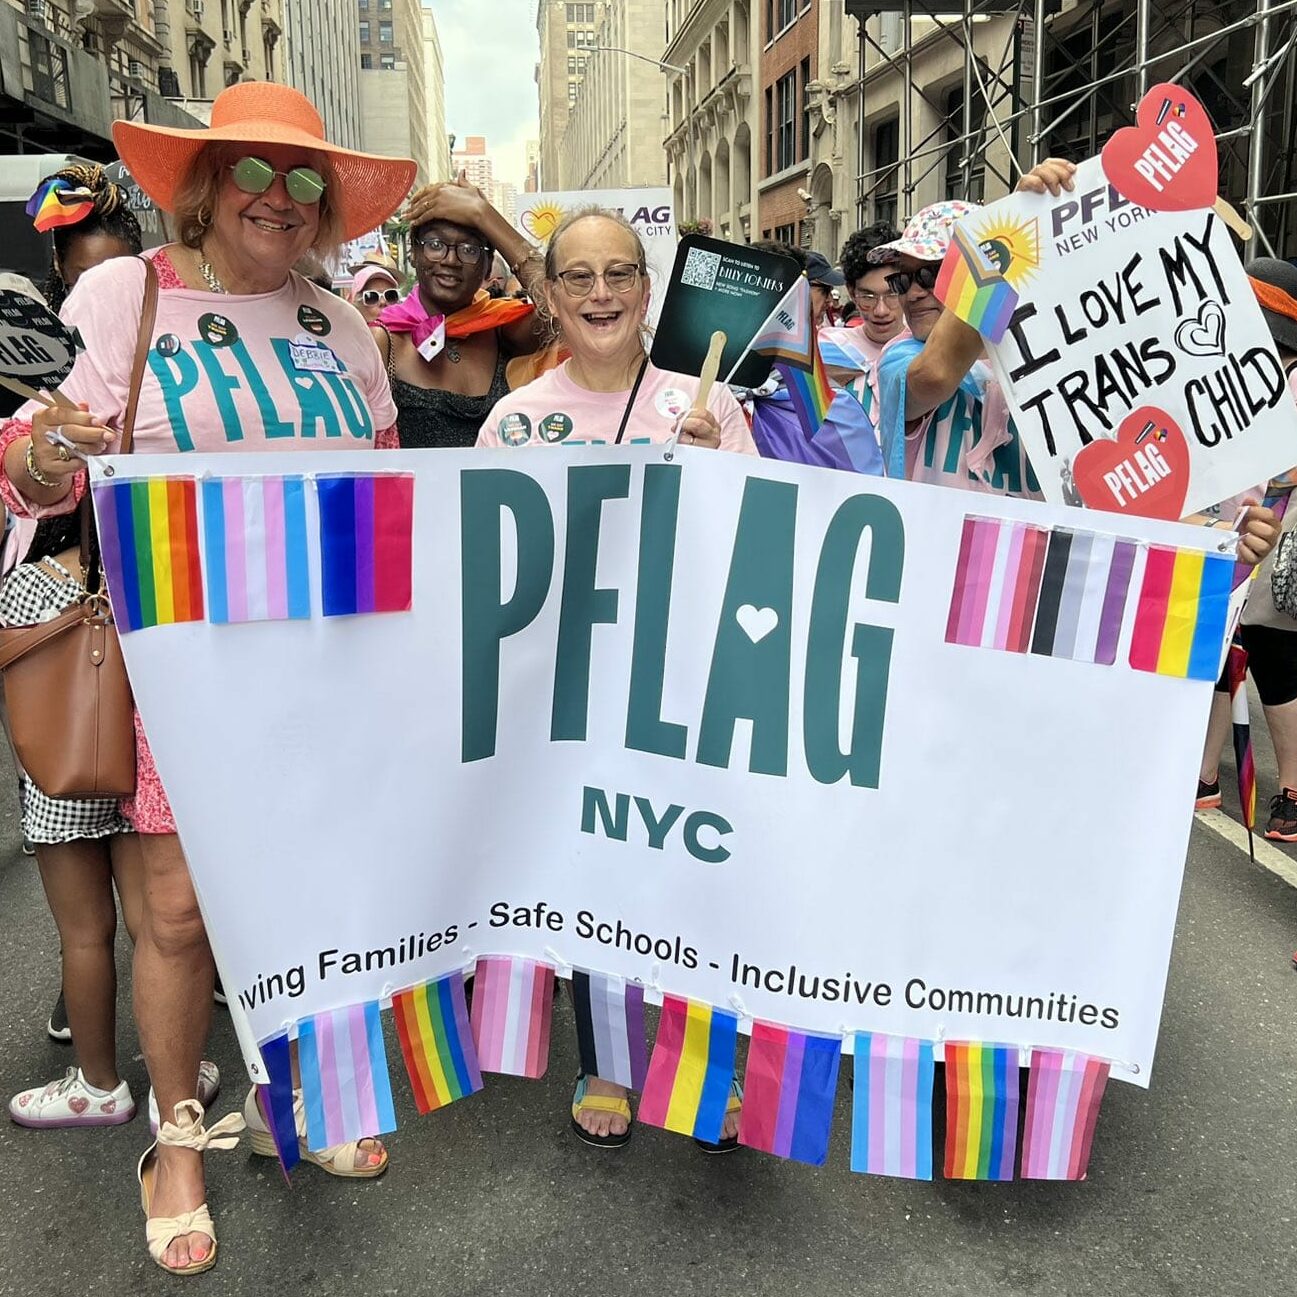 PFLAG members at a rally in New York City holding sign reading 